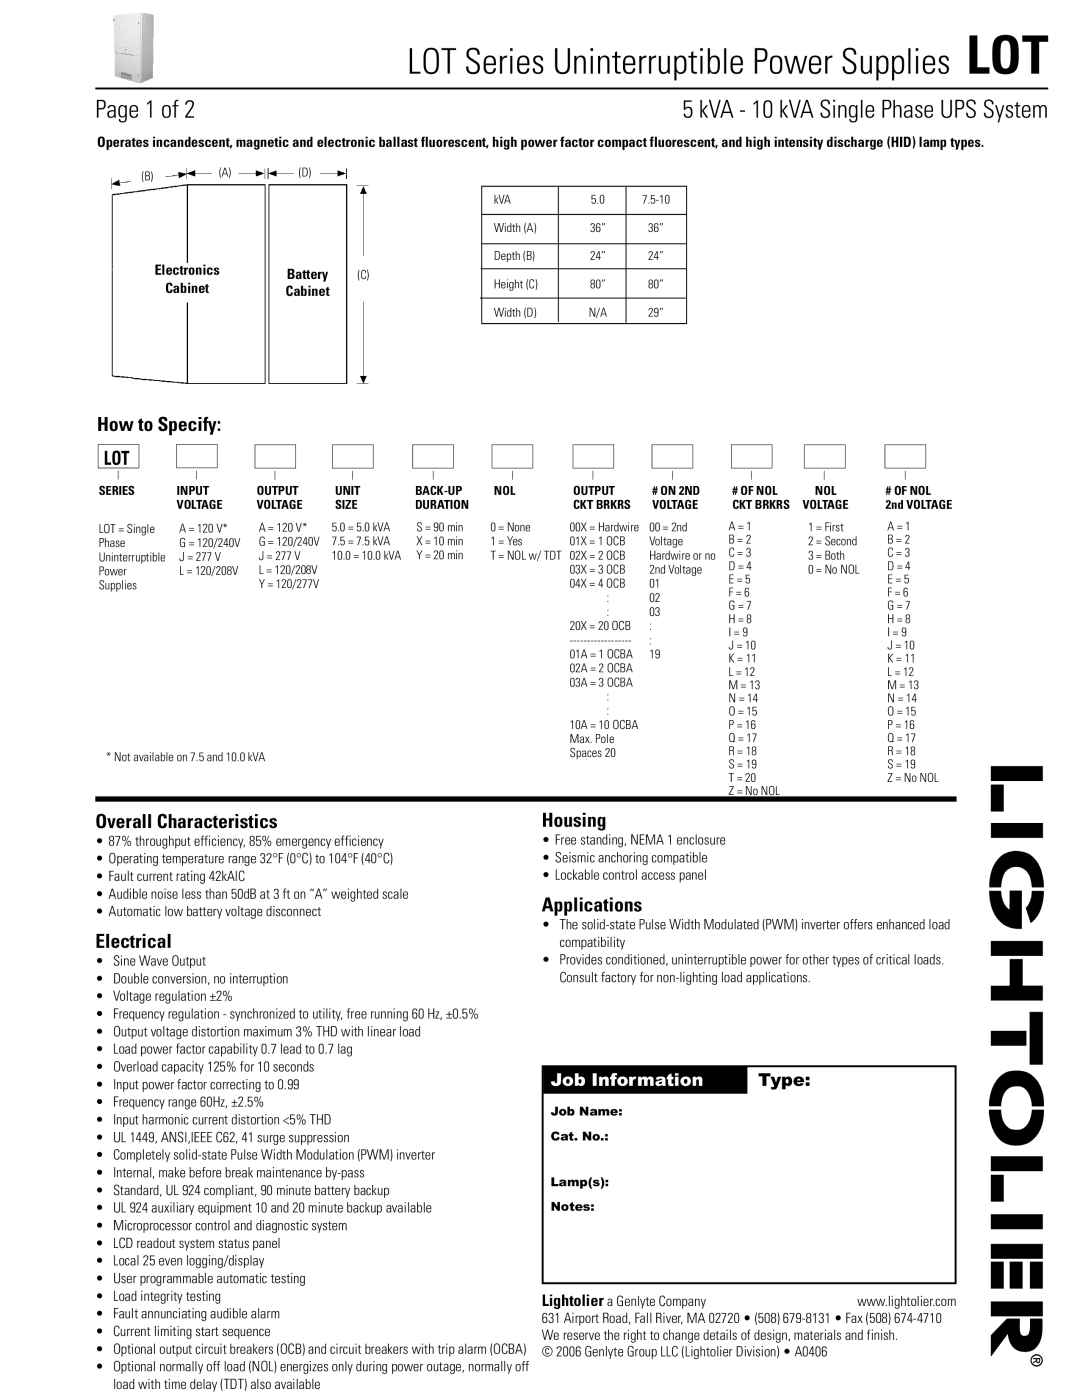 Lightolier LOT Series manual Page 1 of, kVA - 10 kVA Single Phase UPS System, How to Specify LOT, Overall Characteristics 